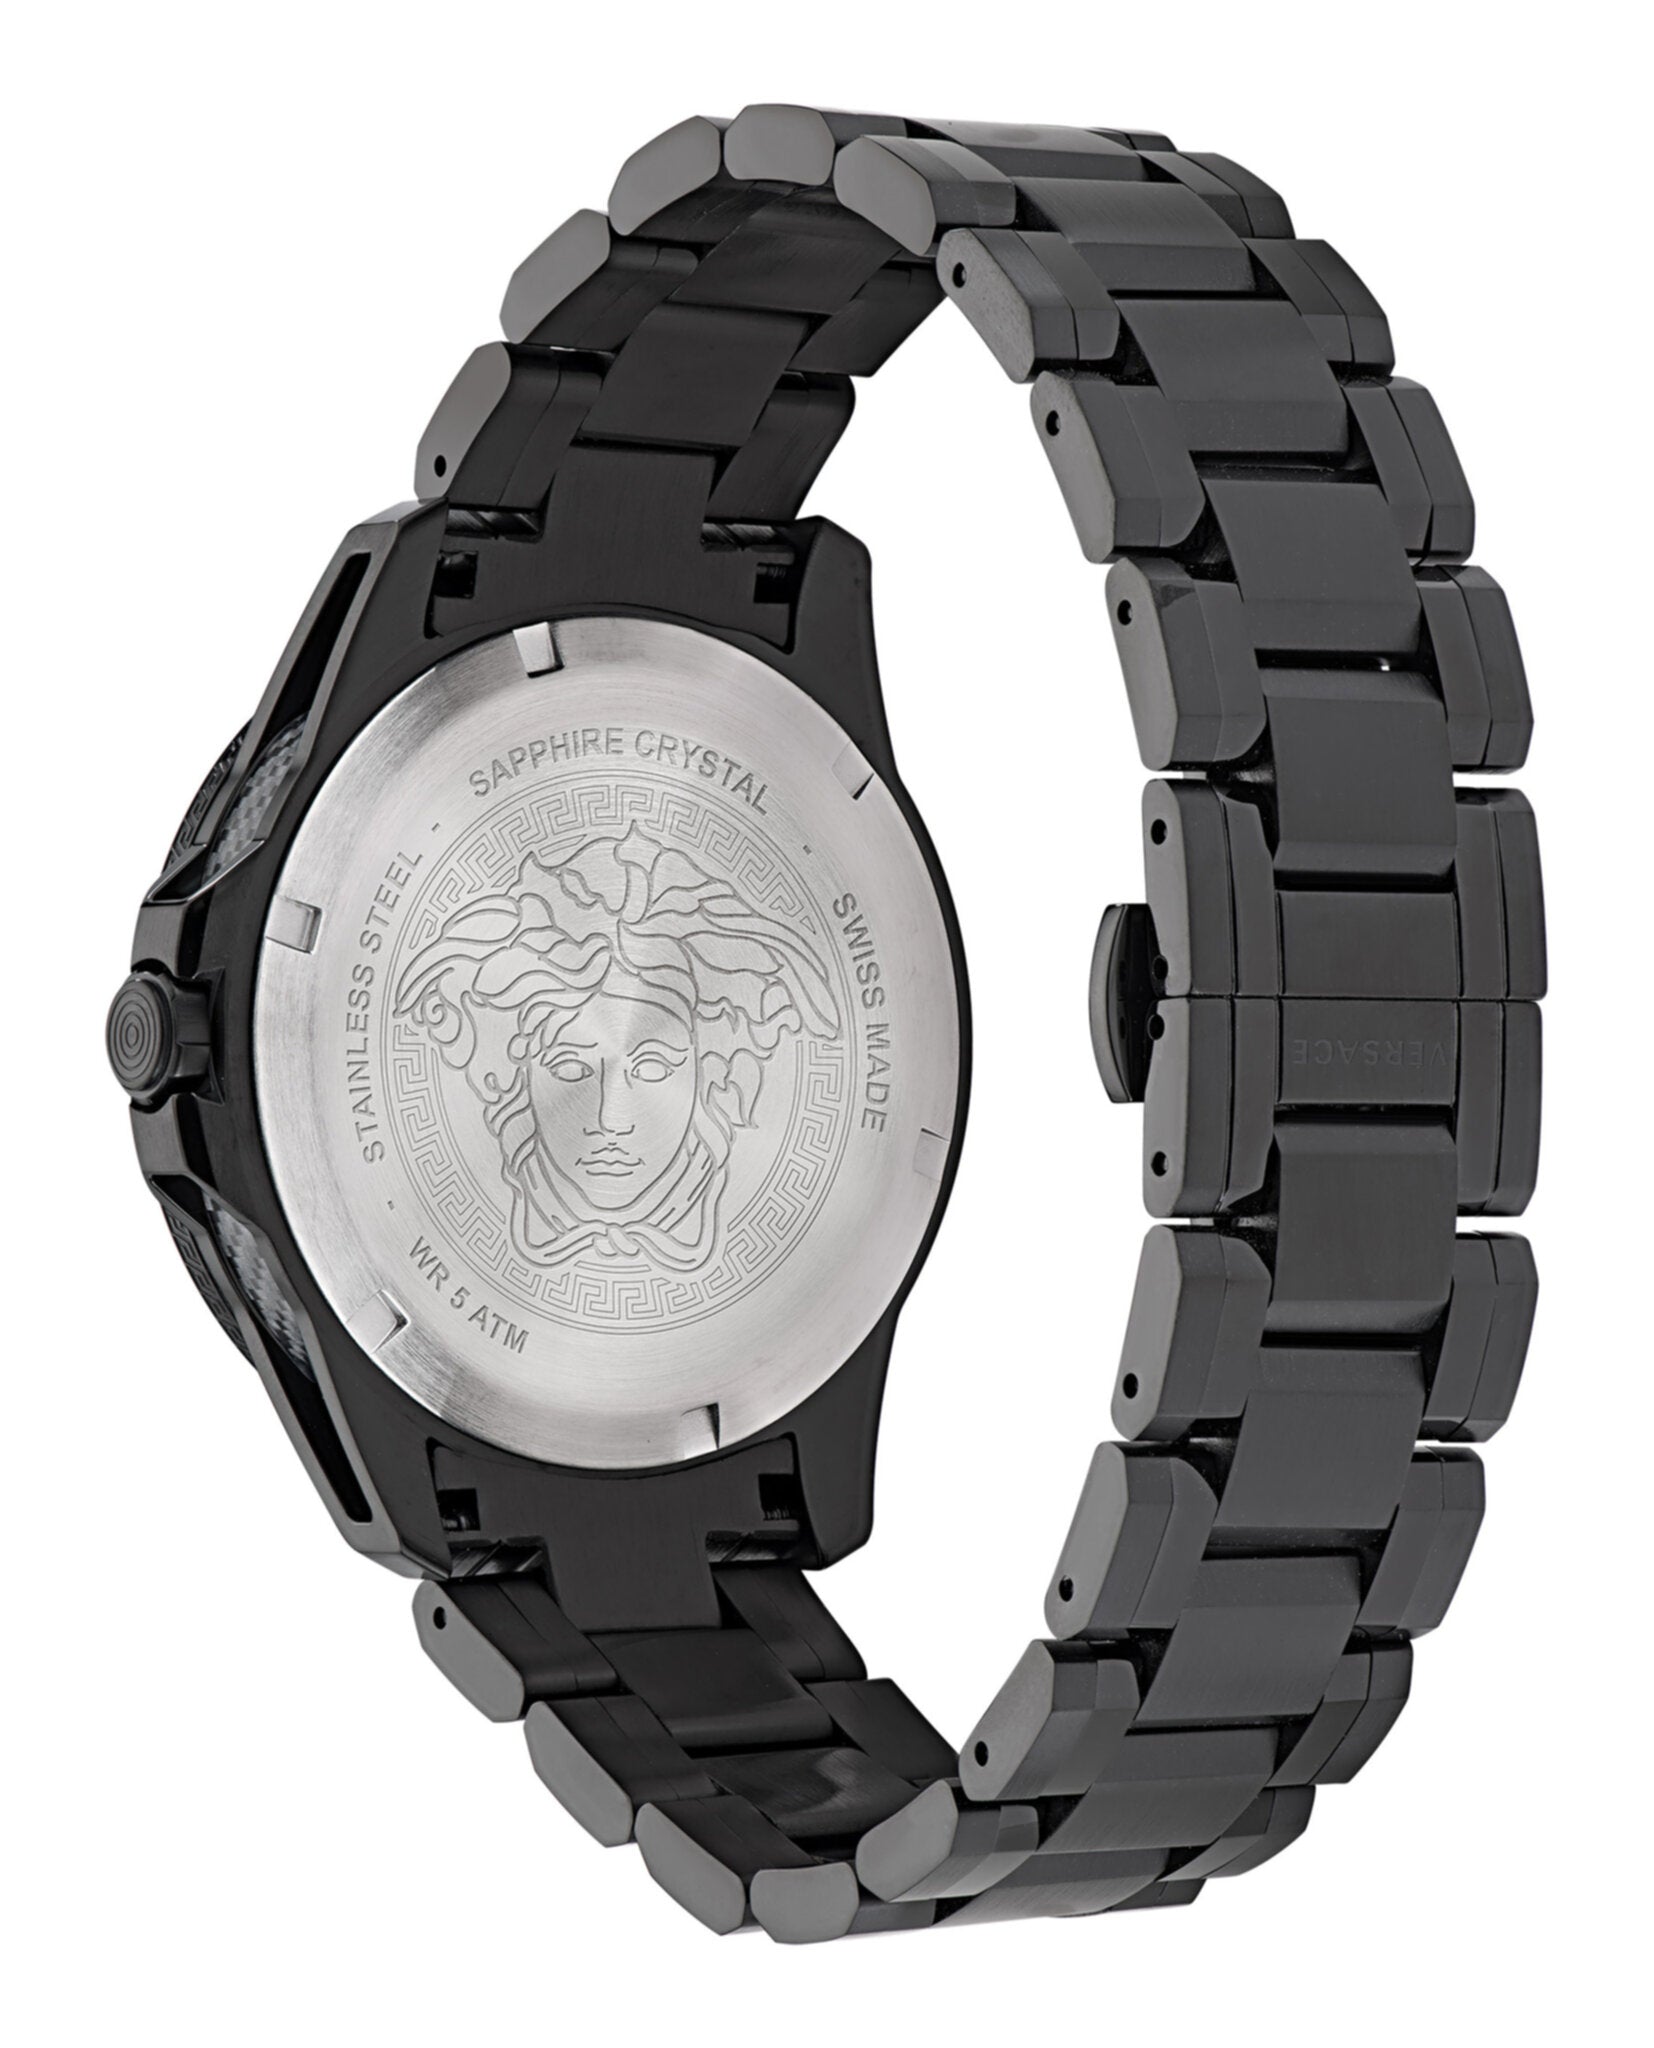 Versace Mens Sport Tech GMT Watches | MadaLuxe Time – Madaluxe Time